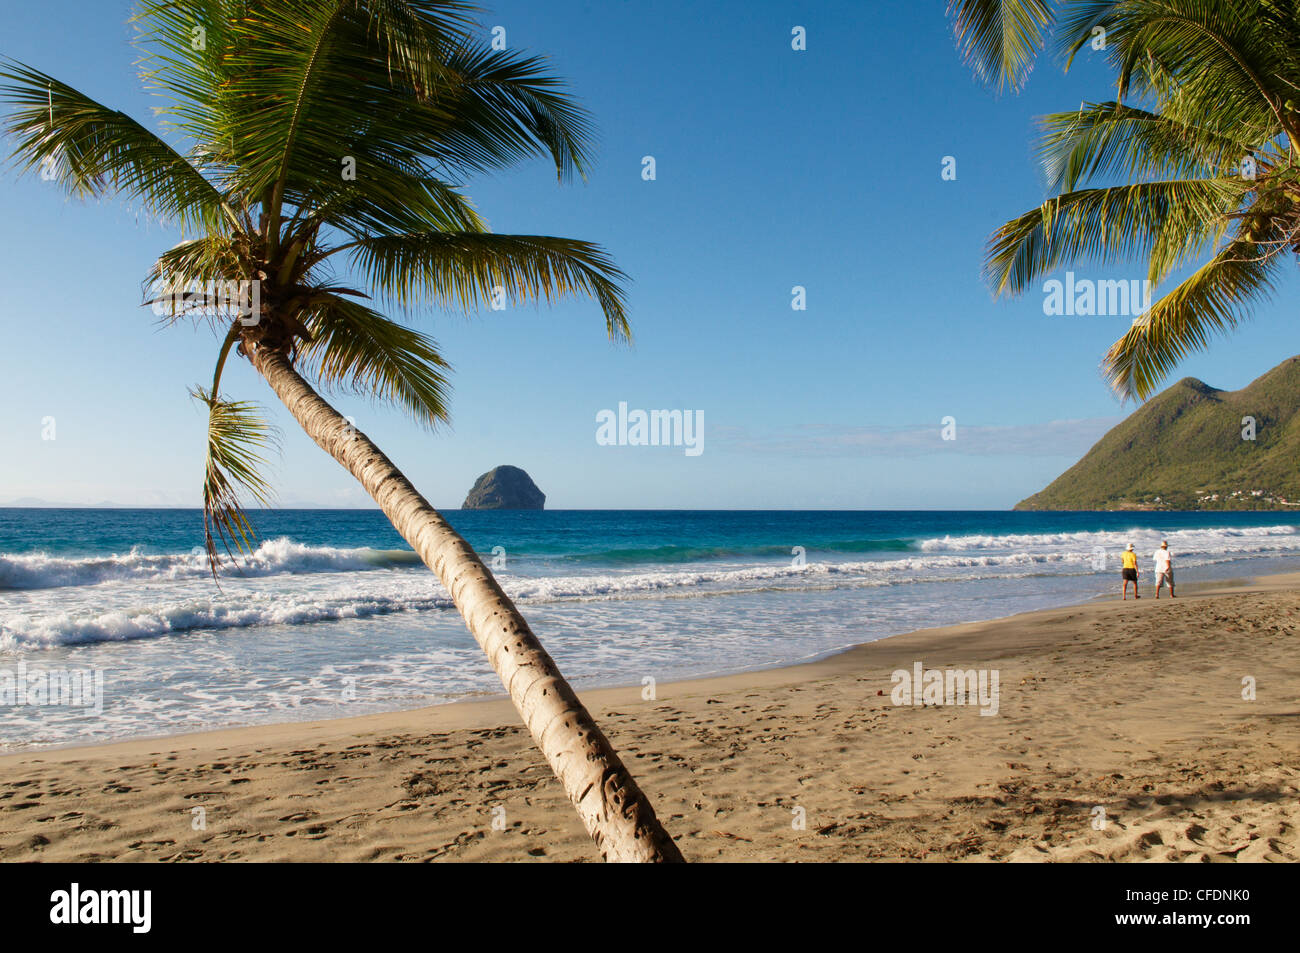 Beach and palm tree, Diamond, Martinique, French Overseas Department, Windward Islands, West Indies, Caribbean, Central America Stock Photo